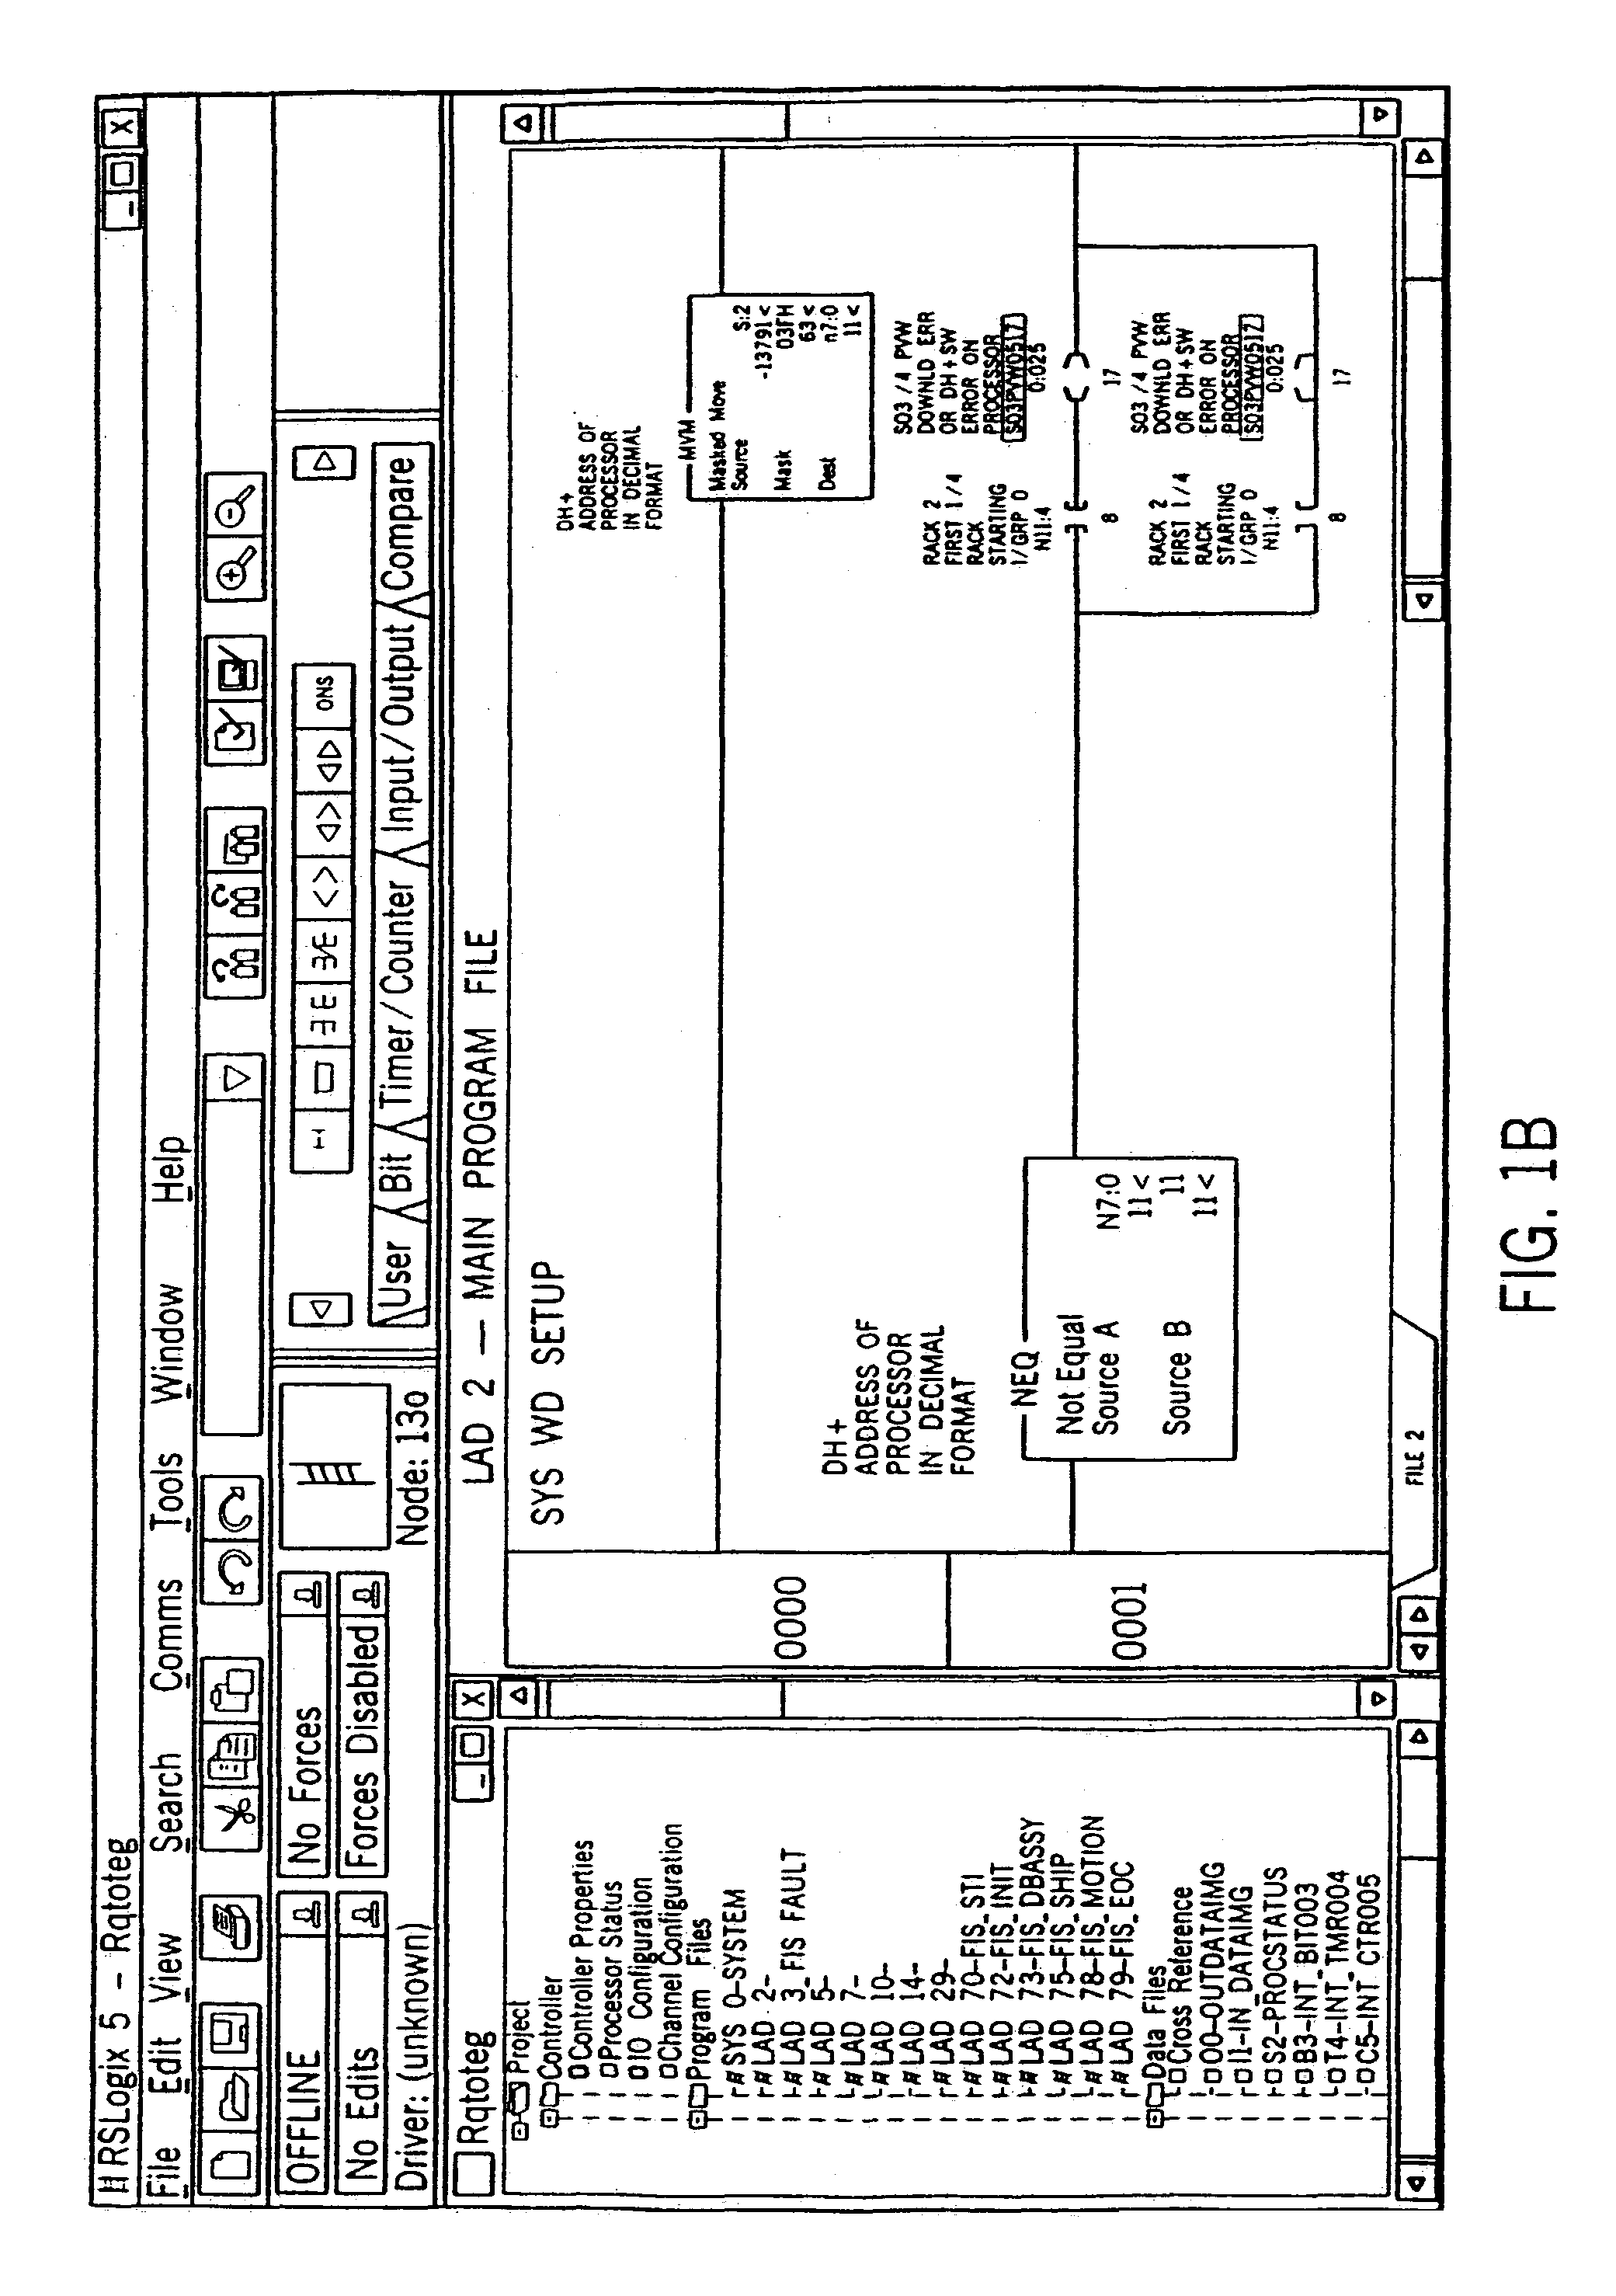 Simulation method and apparatus for use in enterprise controls